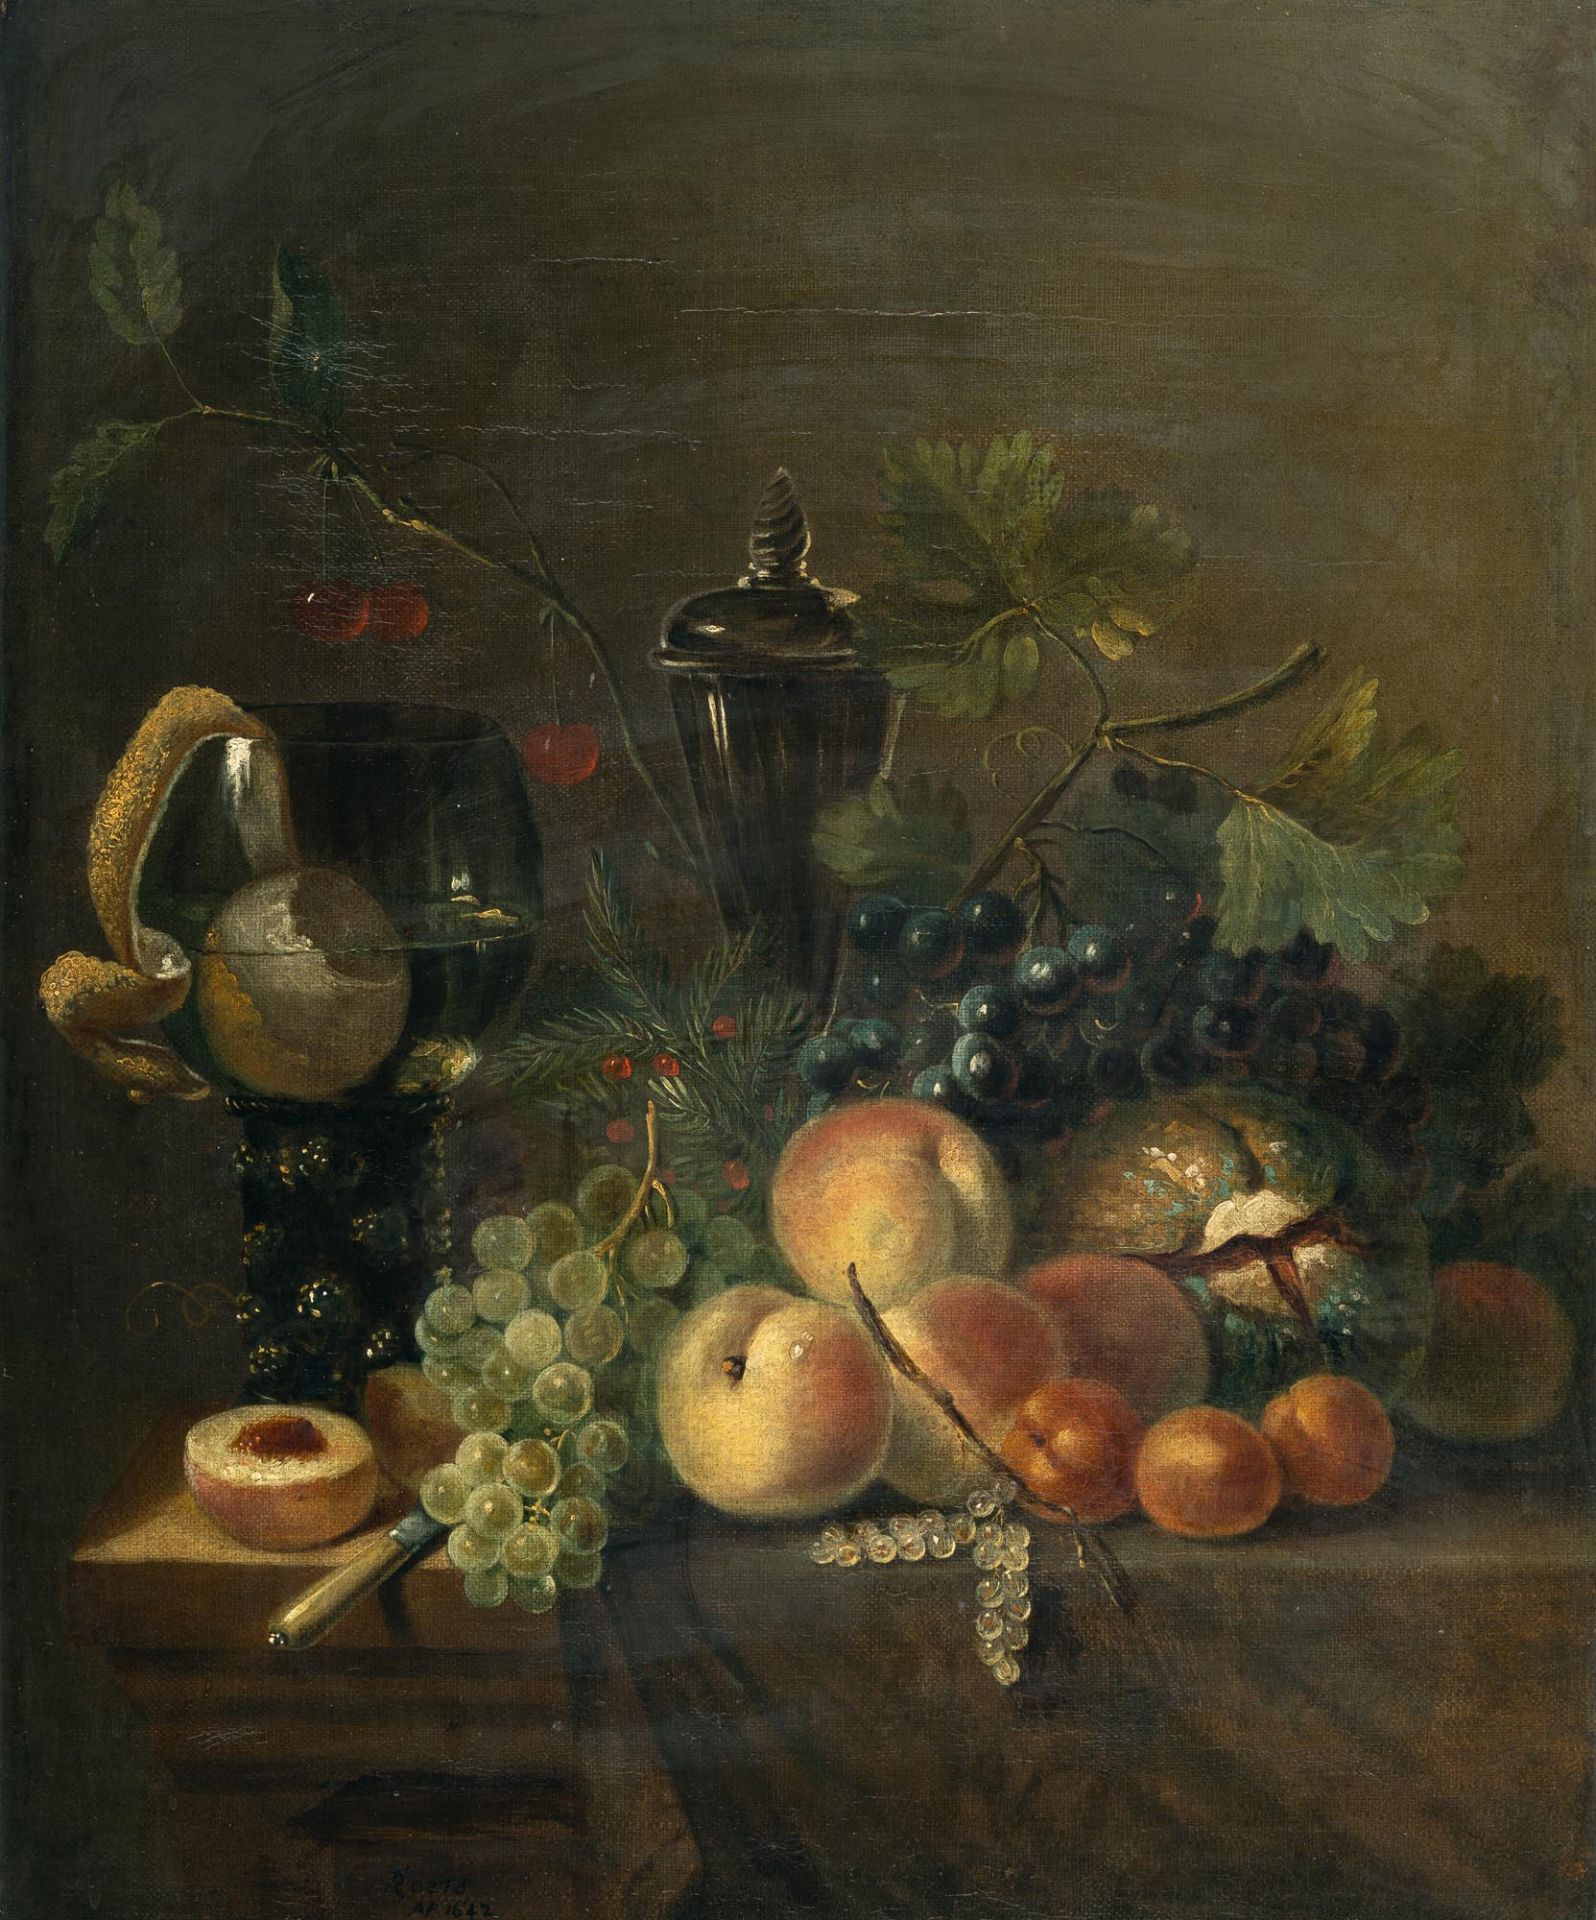 Roelof Koets I (um 1592 – Haarlem – 1654) – Fruit still life with Roemer, peaches and grapes.Oil